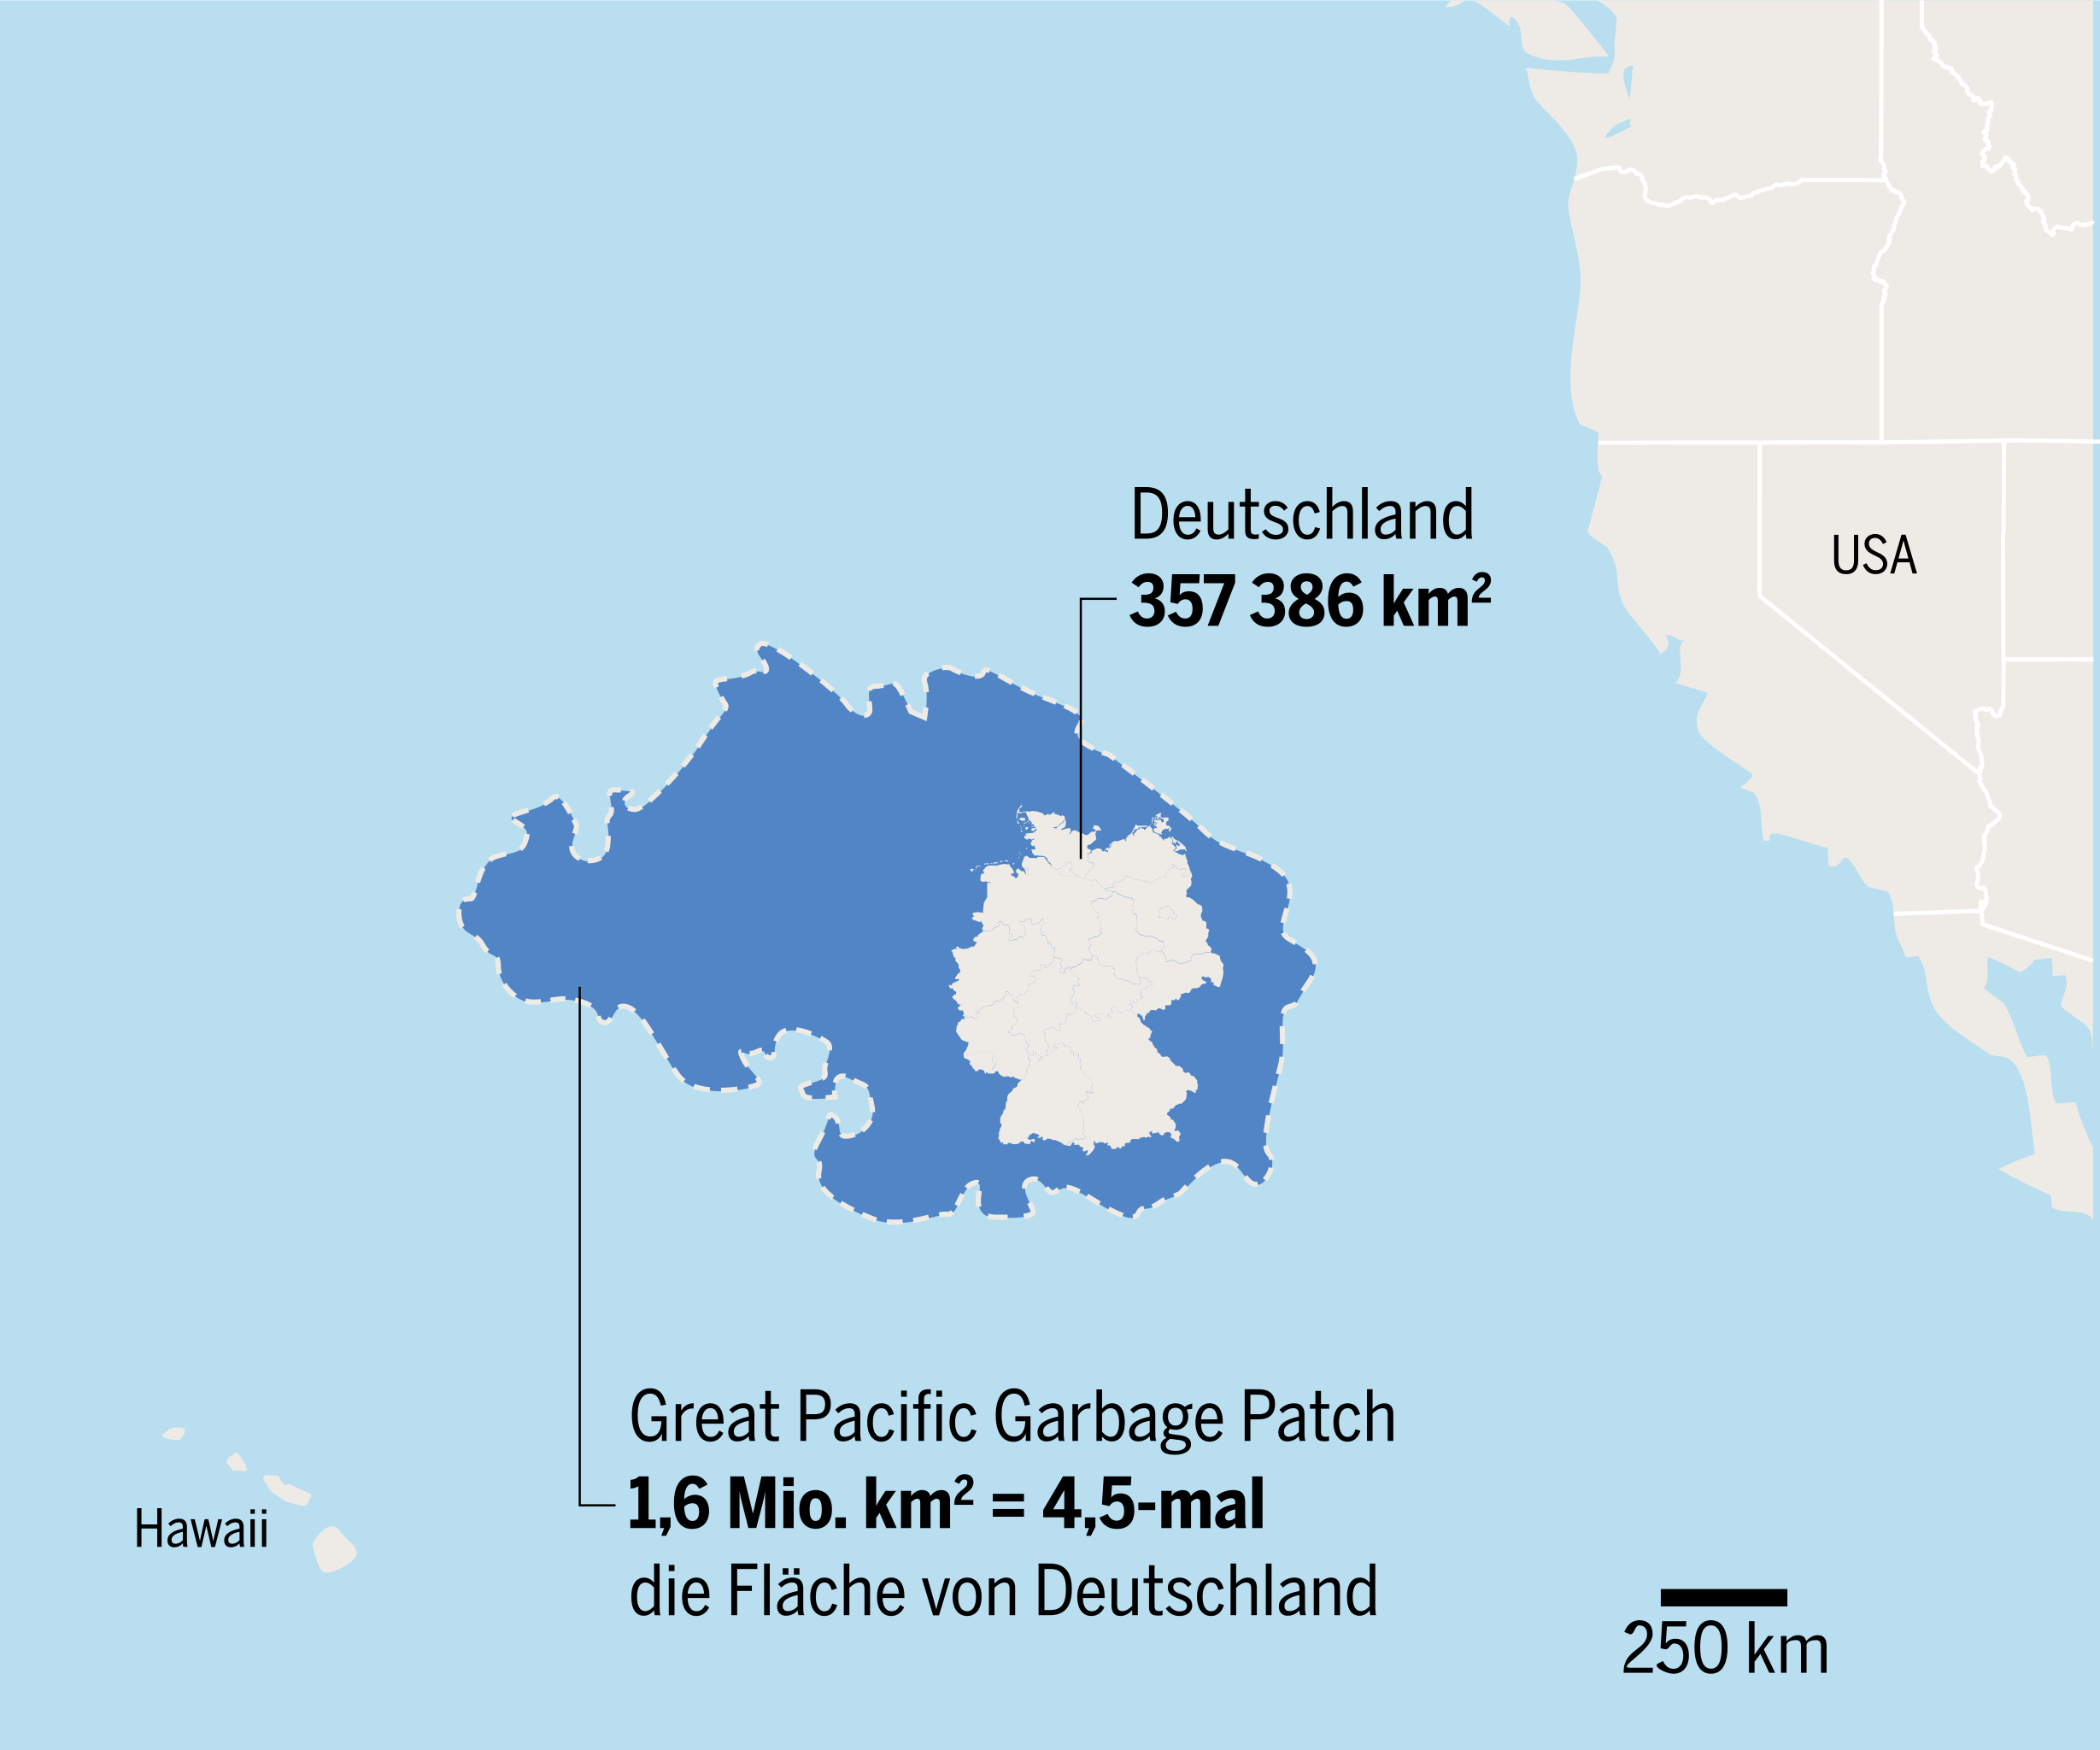 File:Great Pacific Garbage Patch Dimensionen.svg - Wikimedia Commons